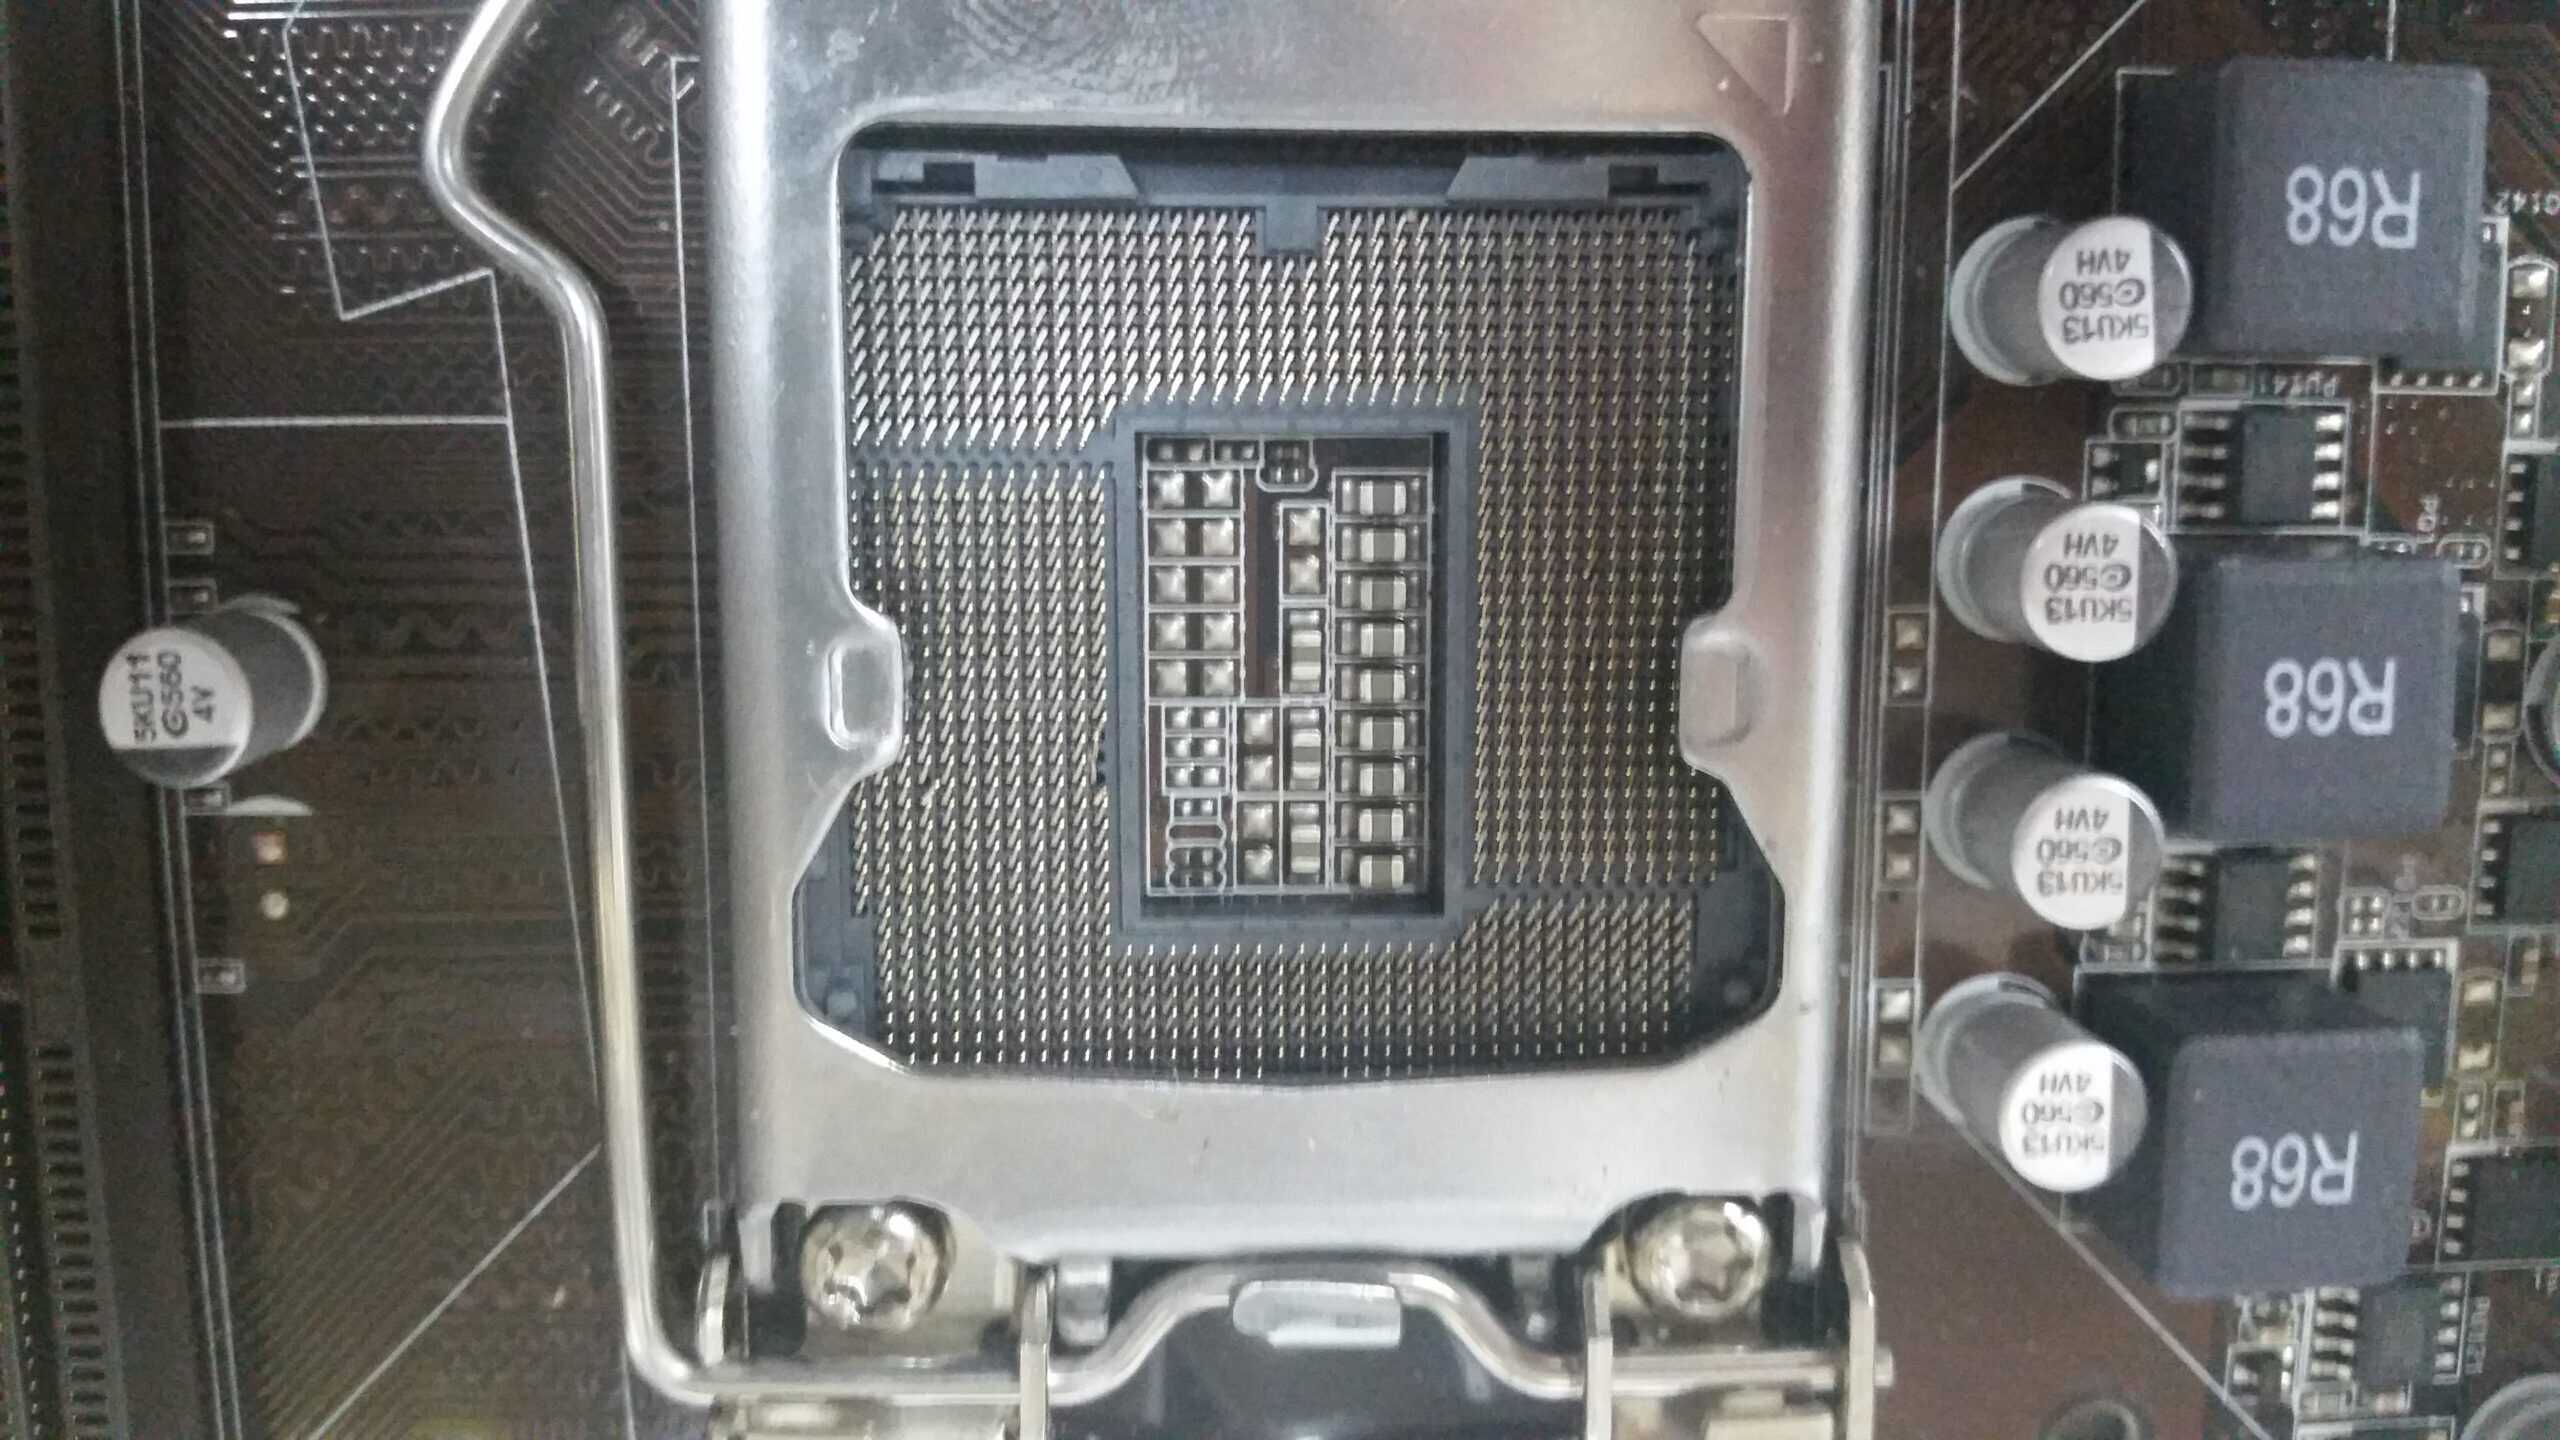 Bent Pins On A Motherboard